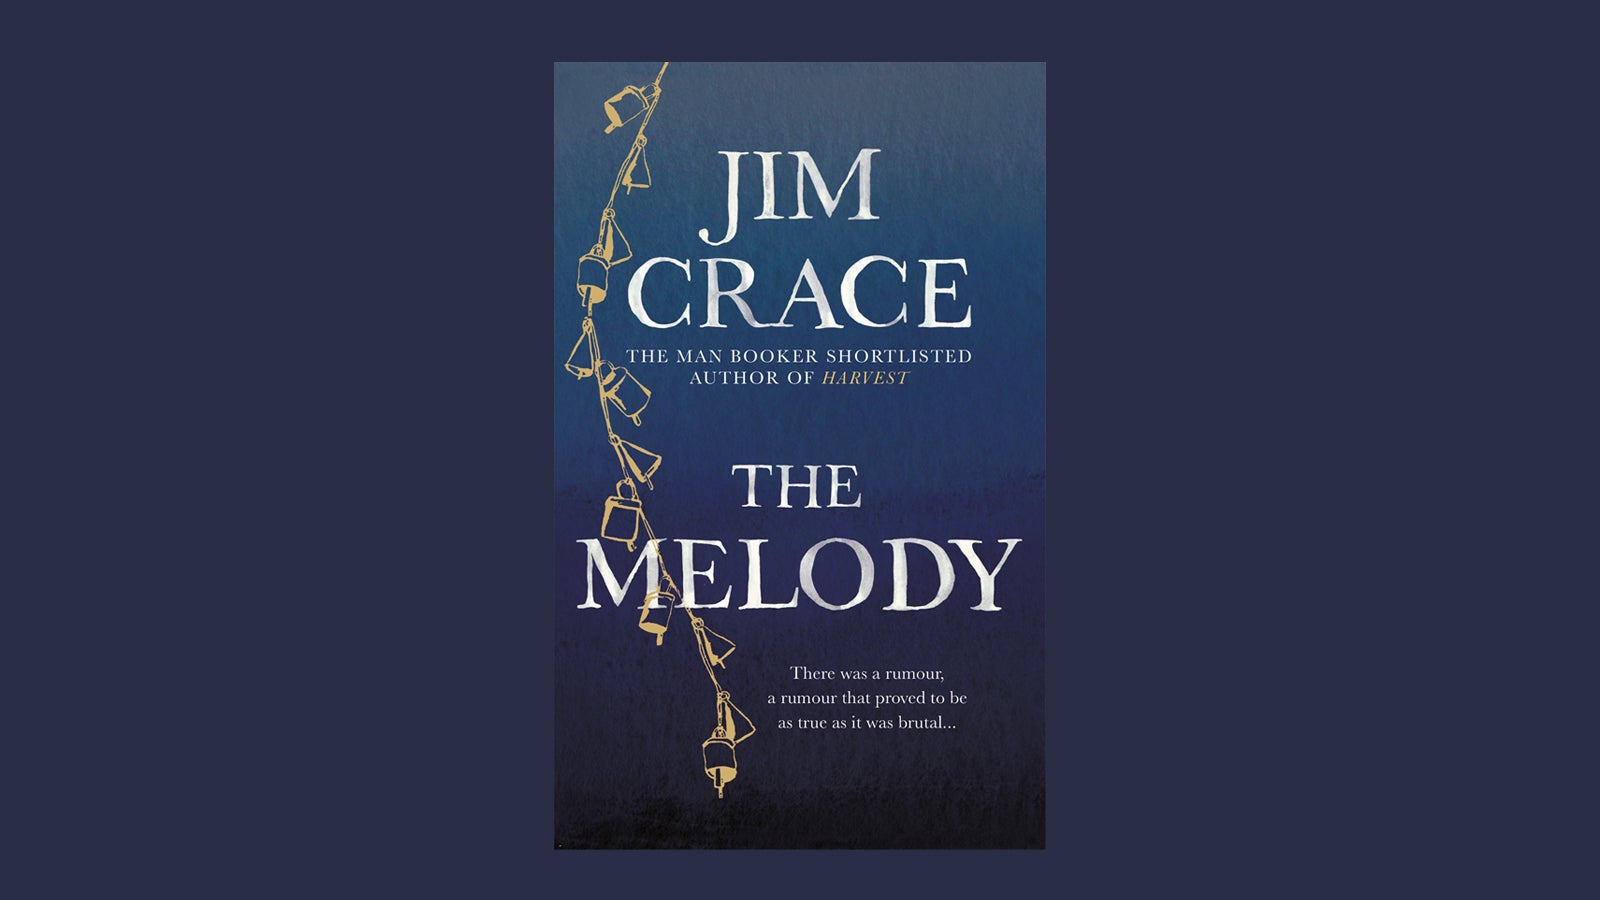 jim-crace-the-melody-book.jpg